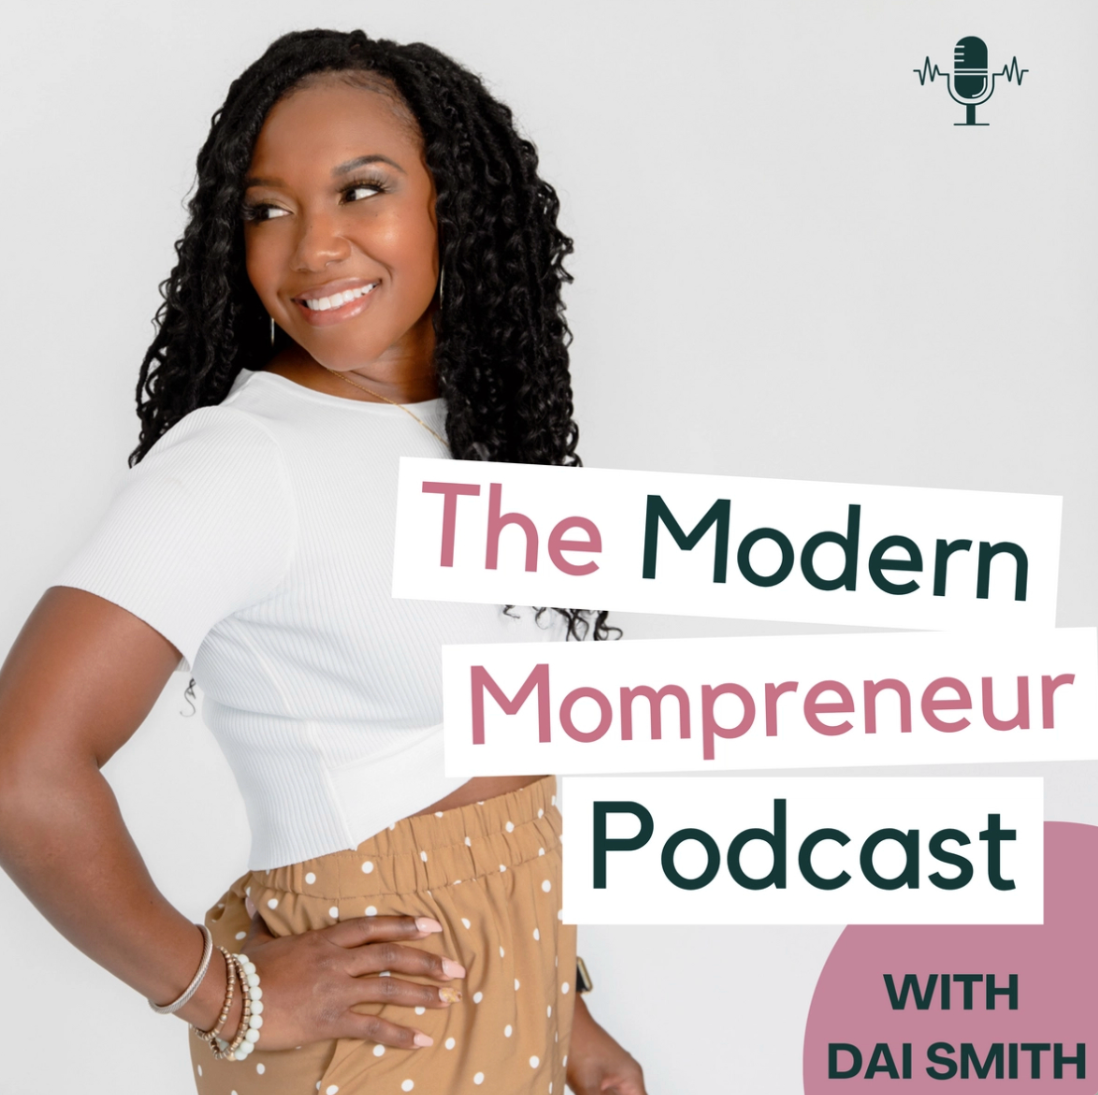 2. The Modern Mompreurs podcast